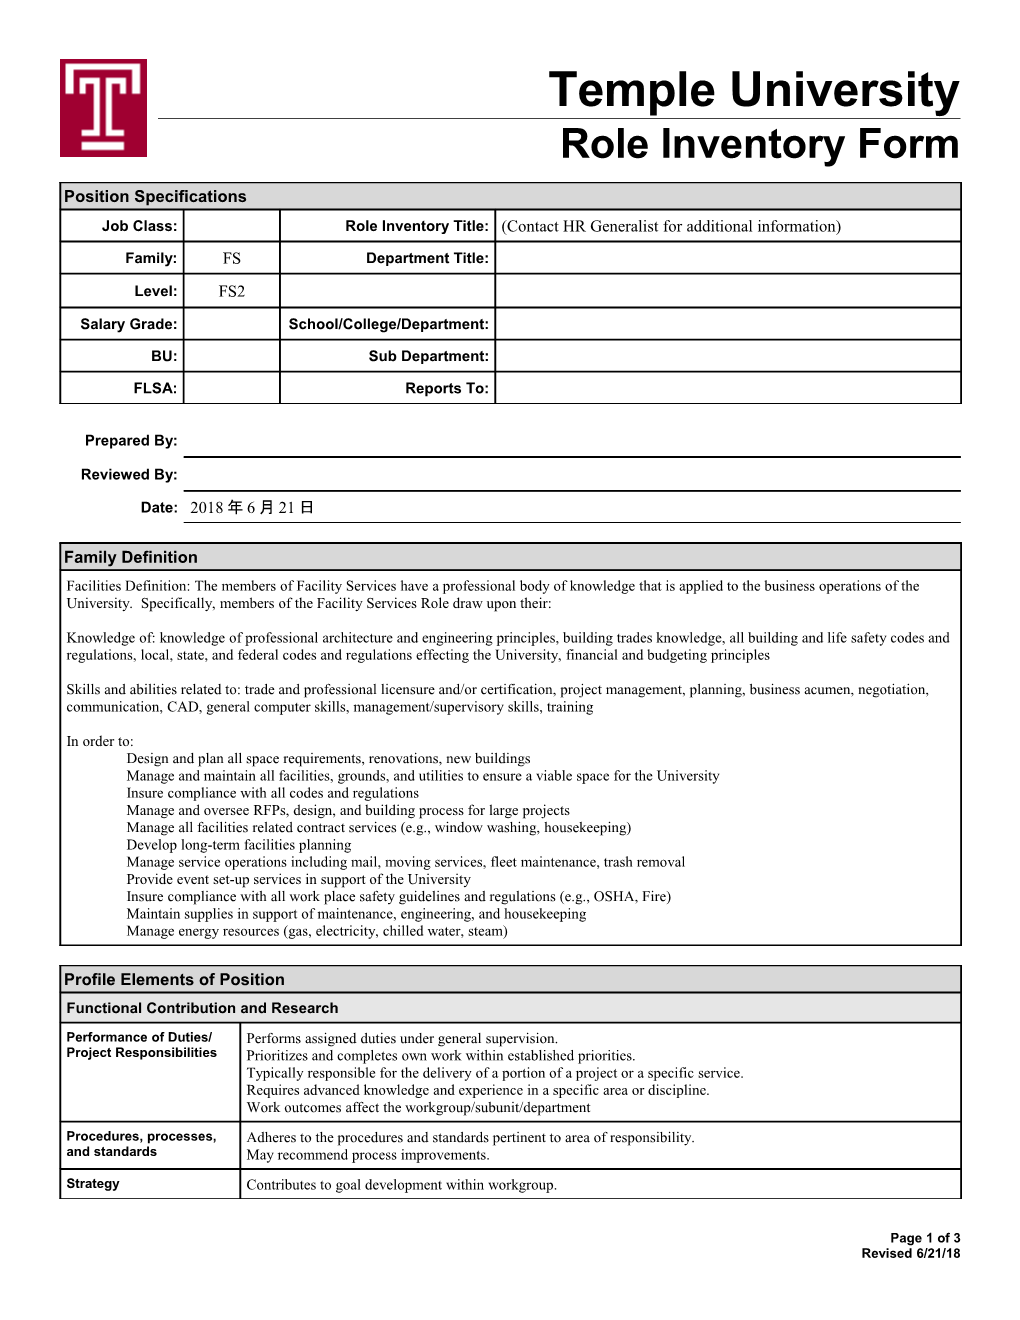 Role Inventory Form